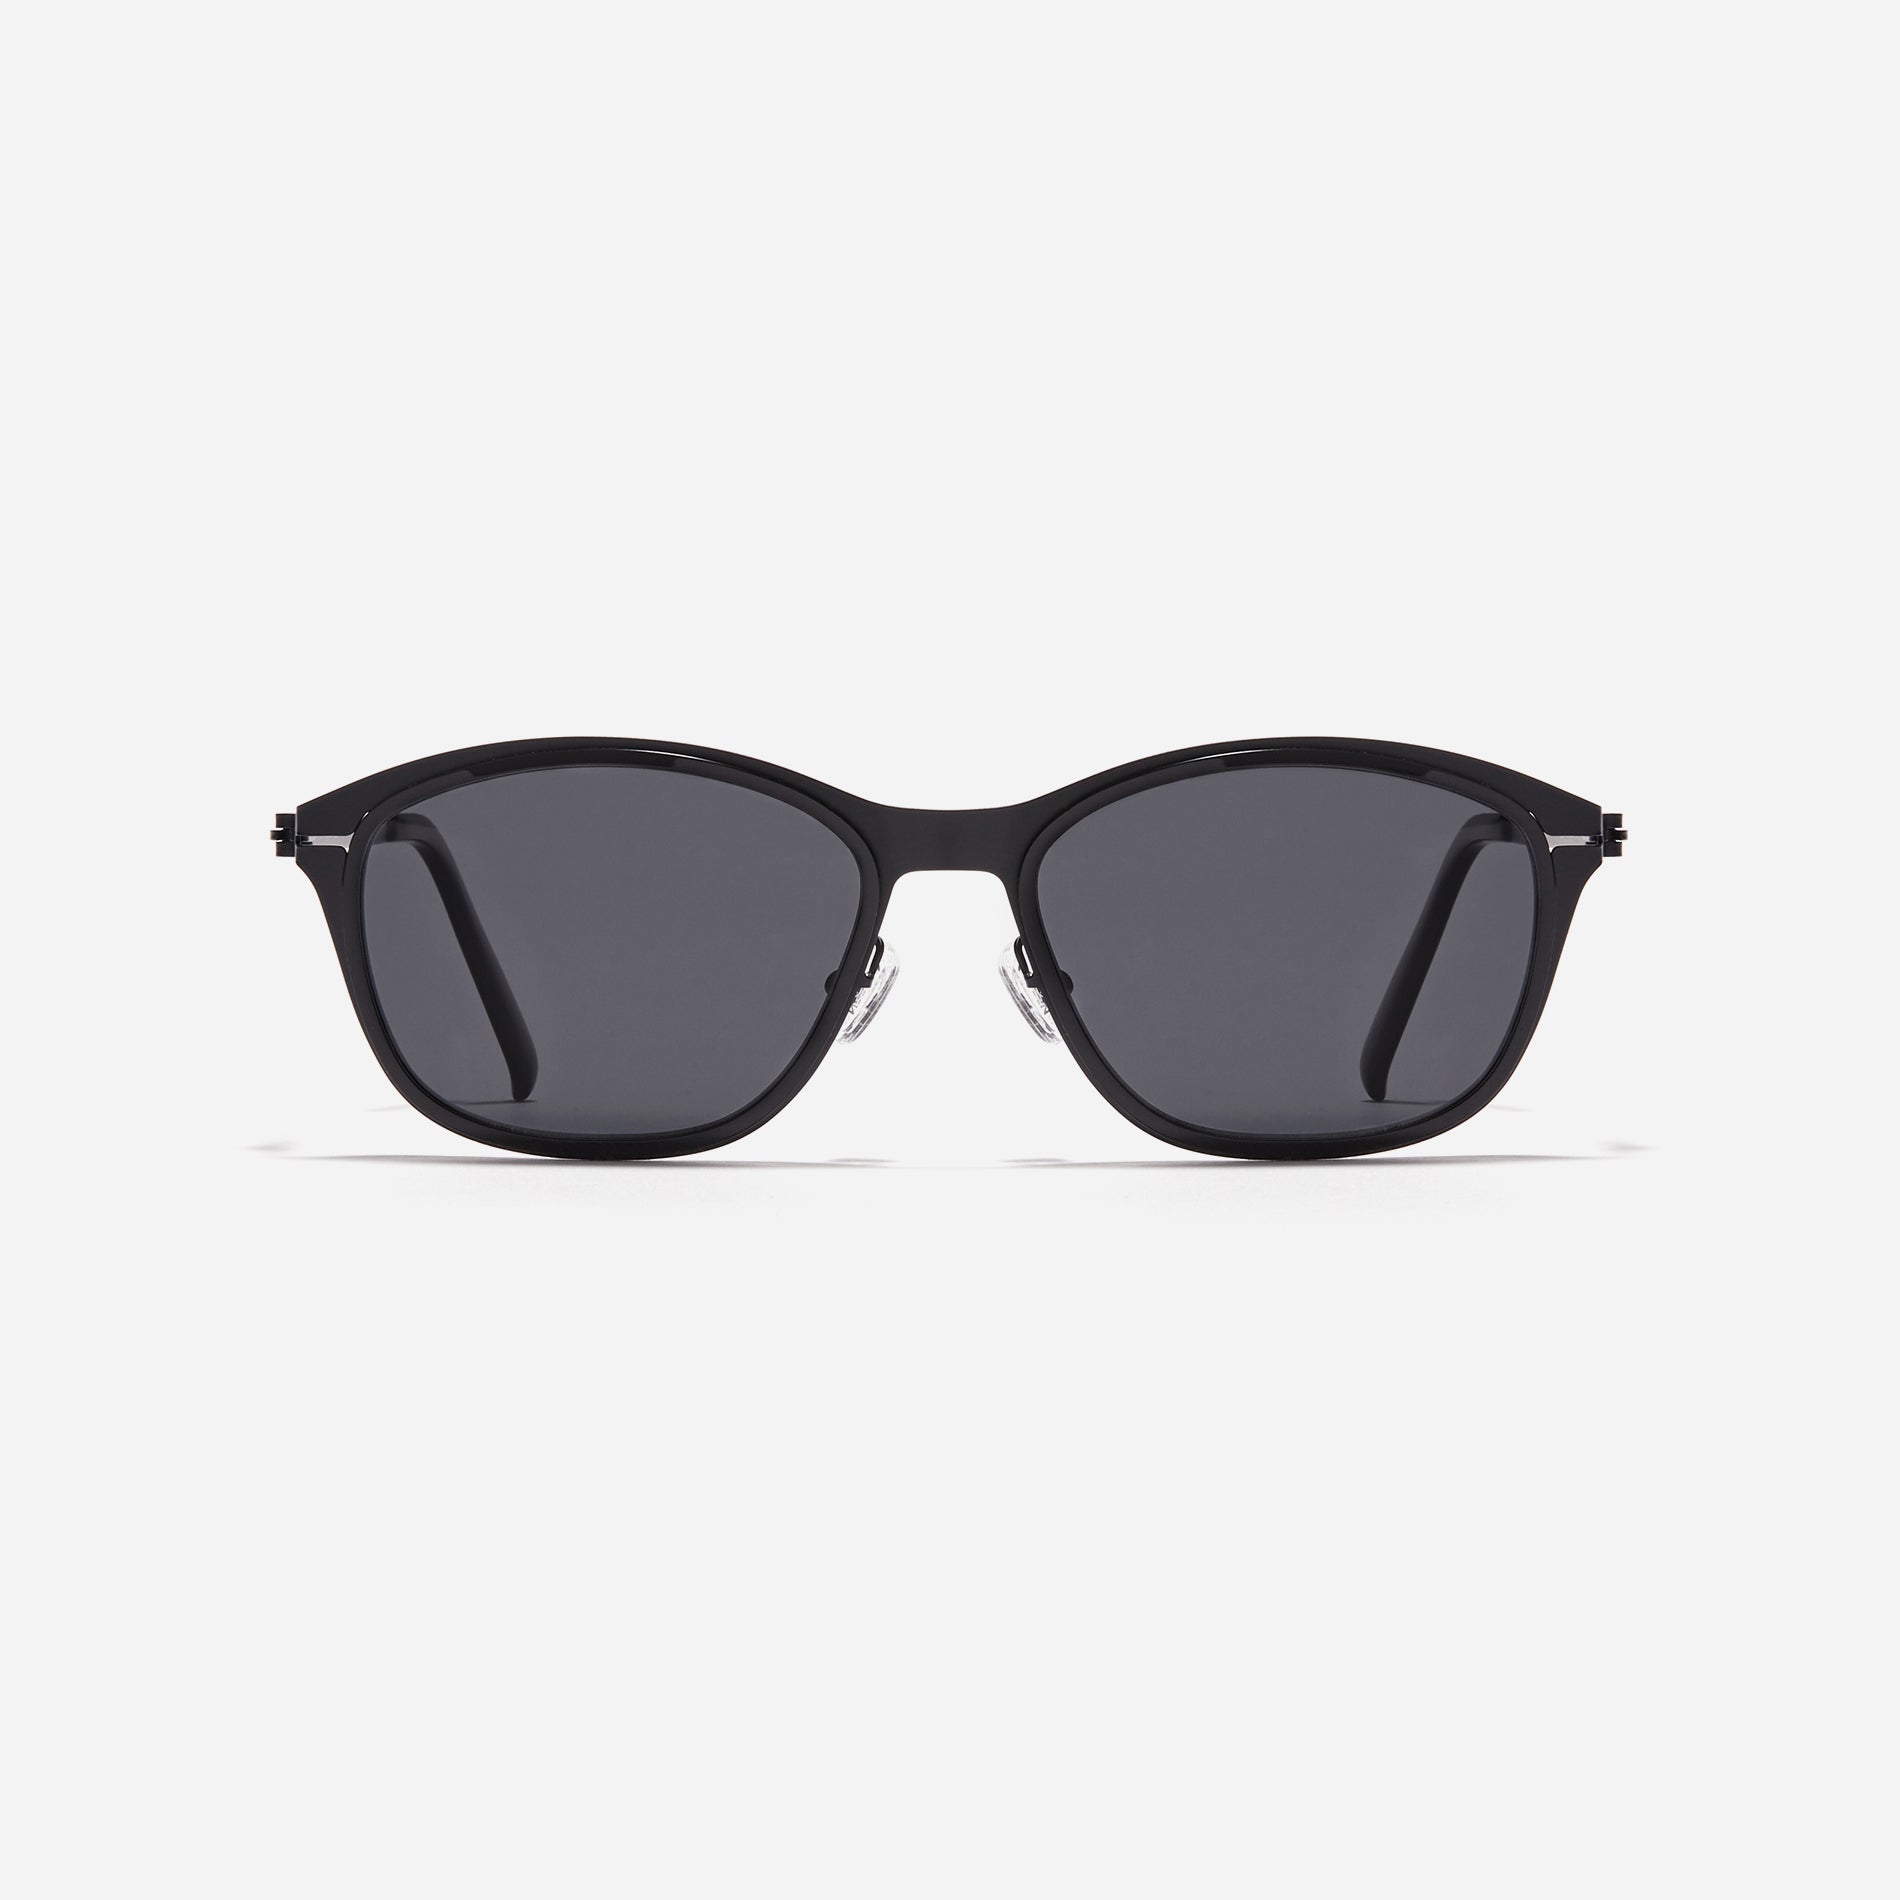 Square-shaped combination sunglasses from the POLARIZED line. With delicate acetate rims, metal temples, and patented screwless hinges, they ensure both durability and comfort. Borgarde features polarized lenses that block UV rays and reduce glare, providing clear vision for outdoor activities.